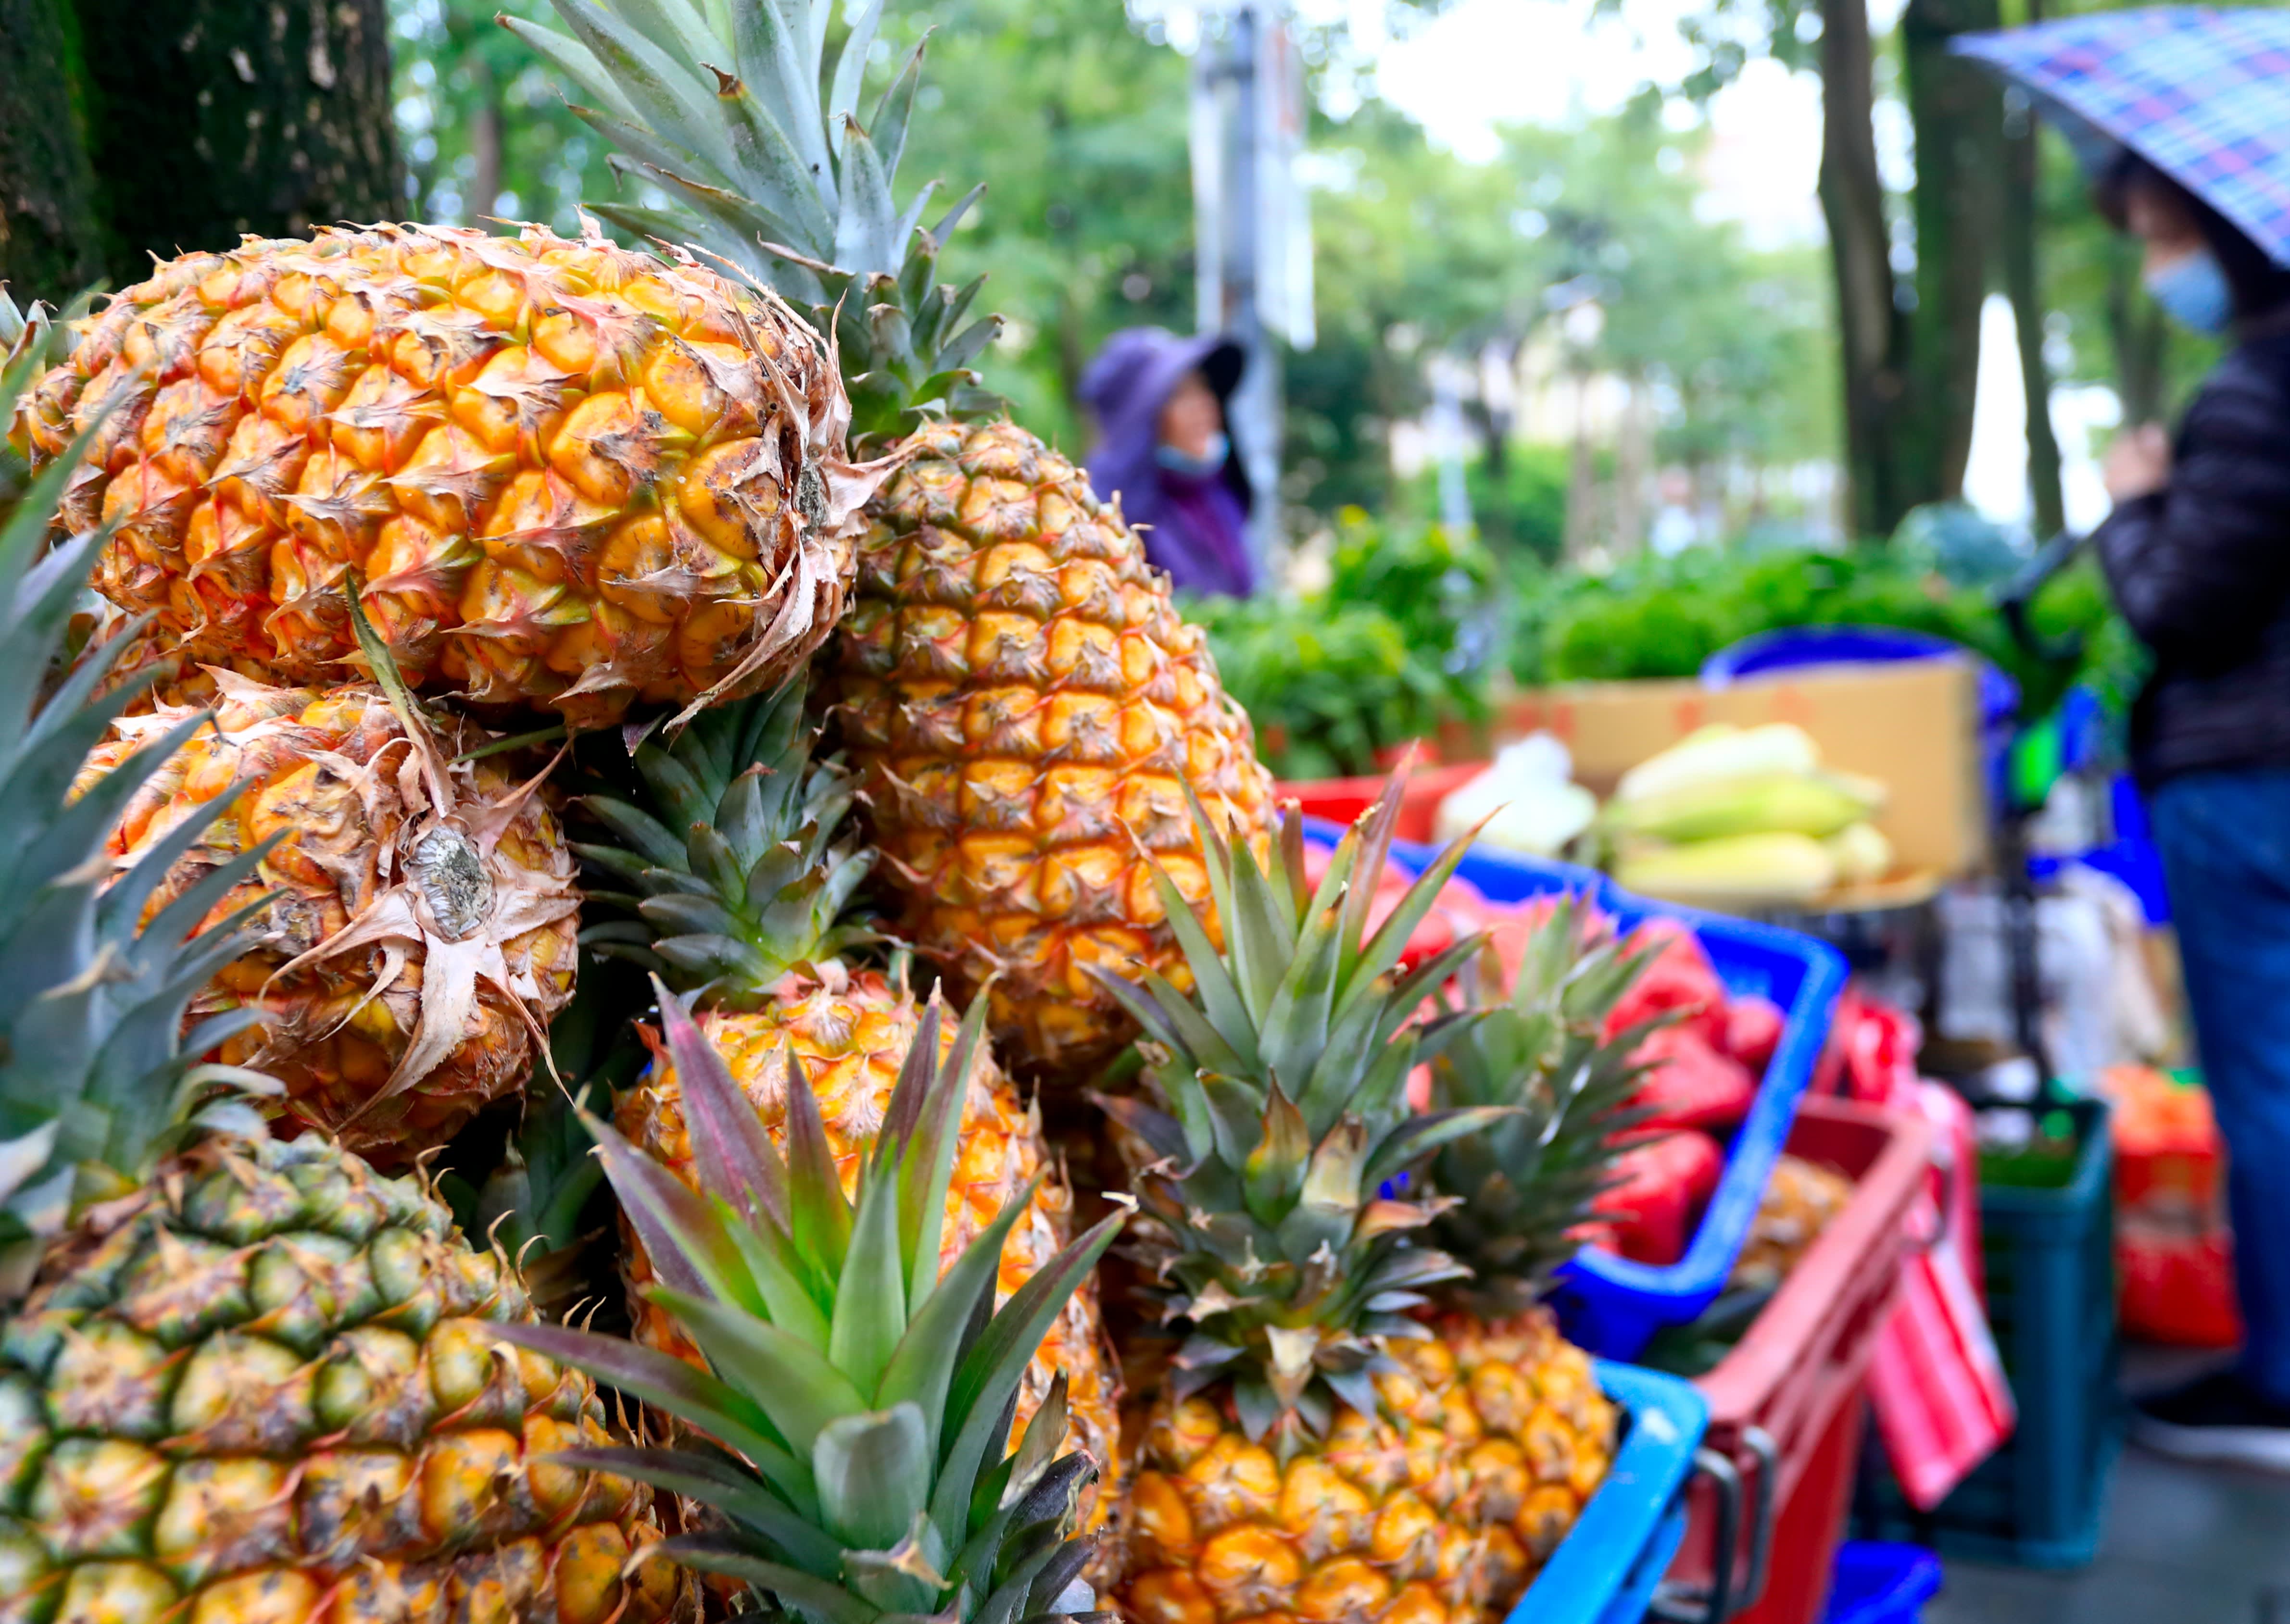 China’s pineapple ban is not in line with global trade rules